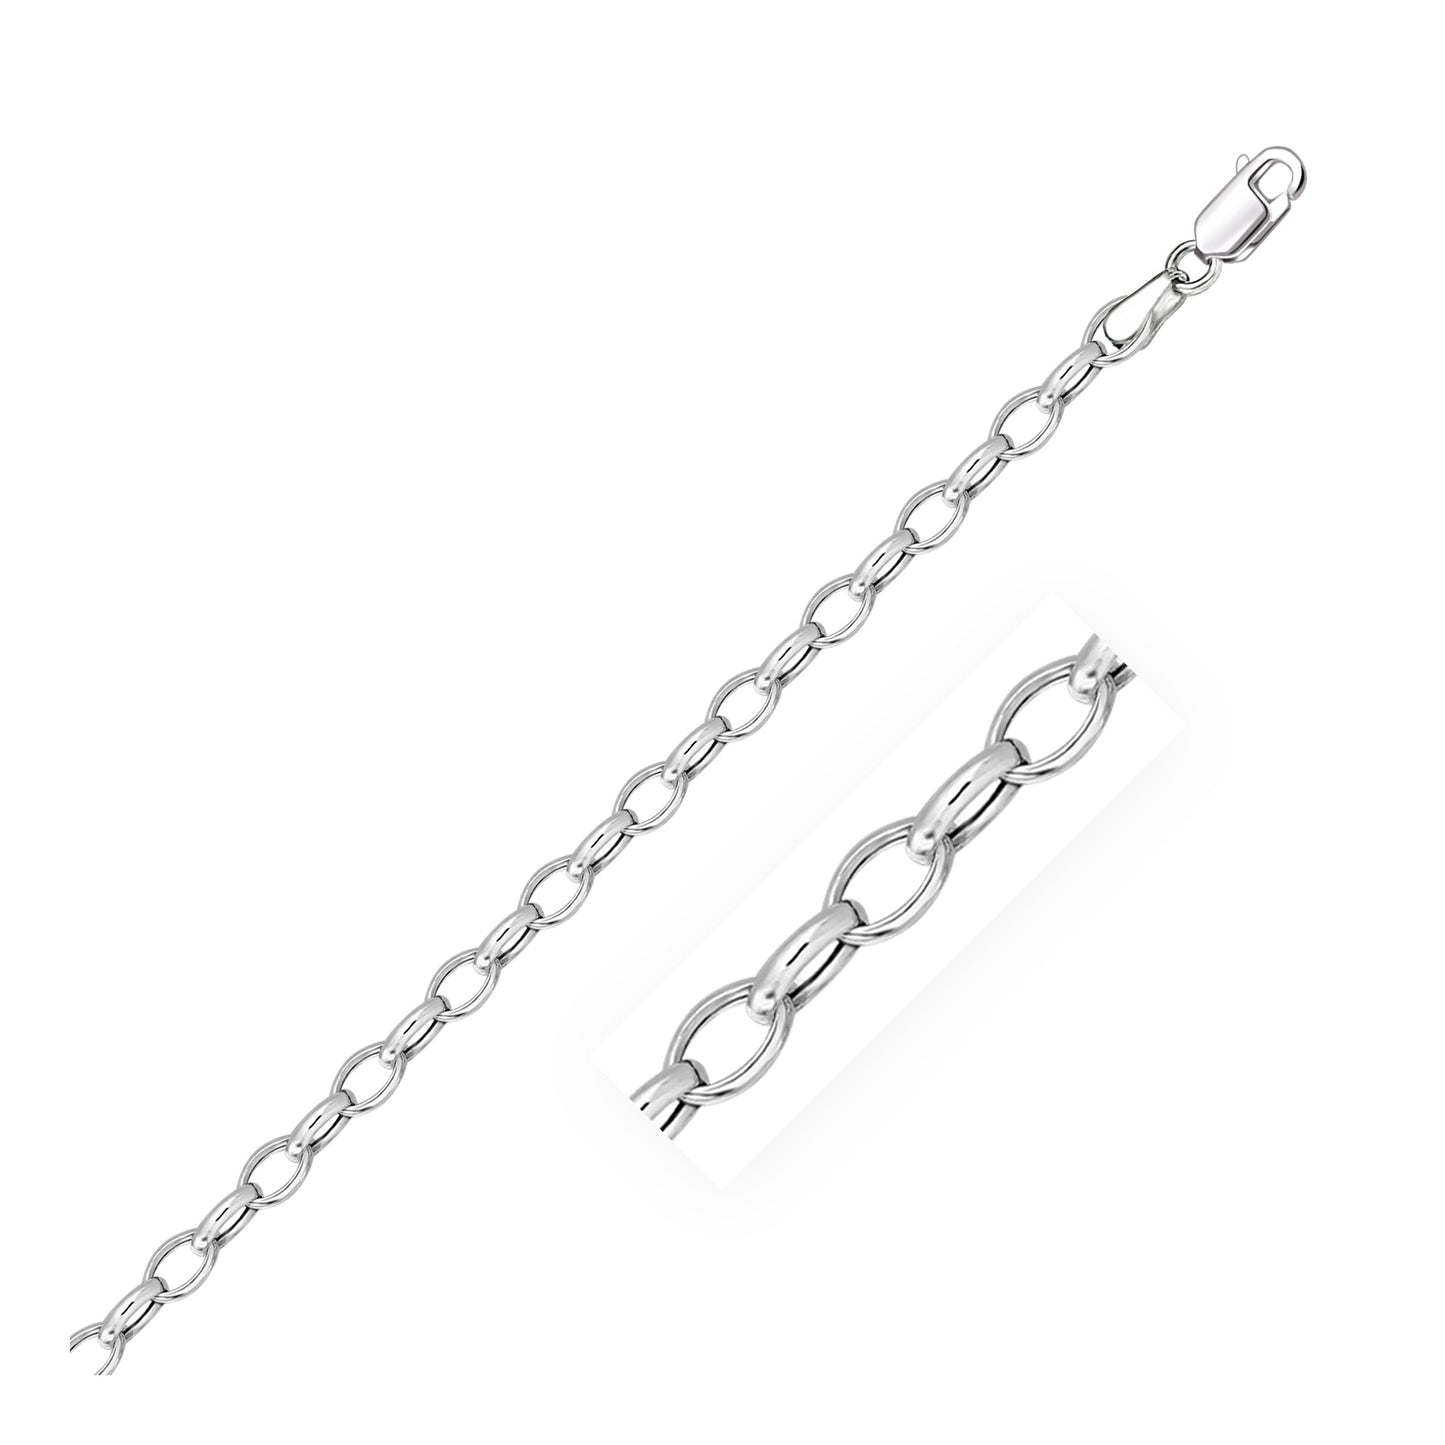 4.6mm 14k White Gold Oval Rolo Chain